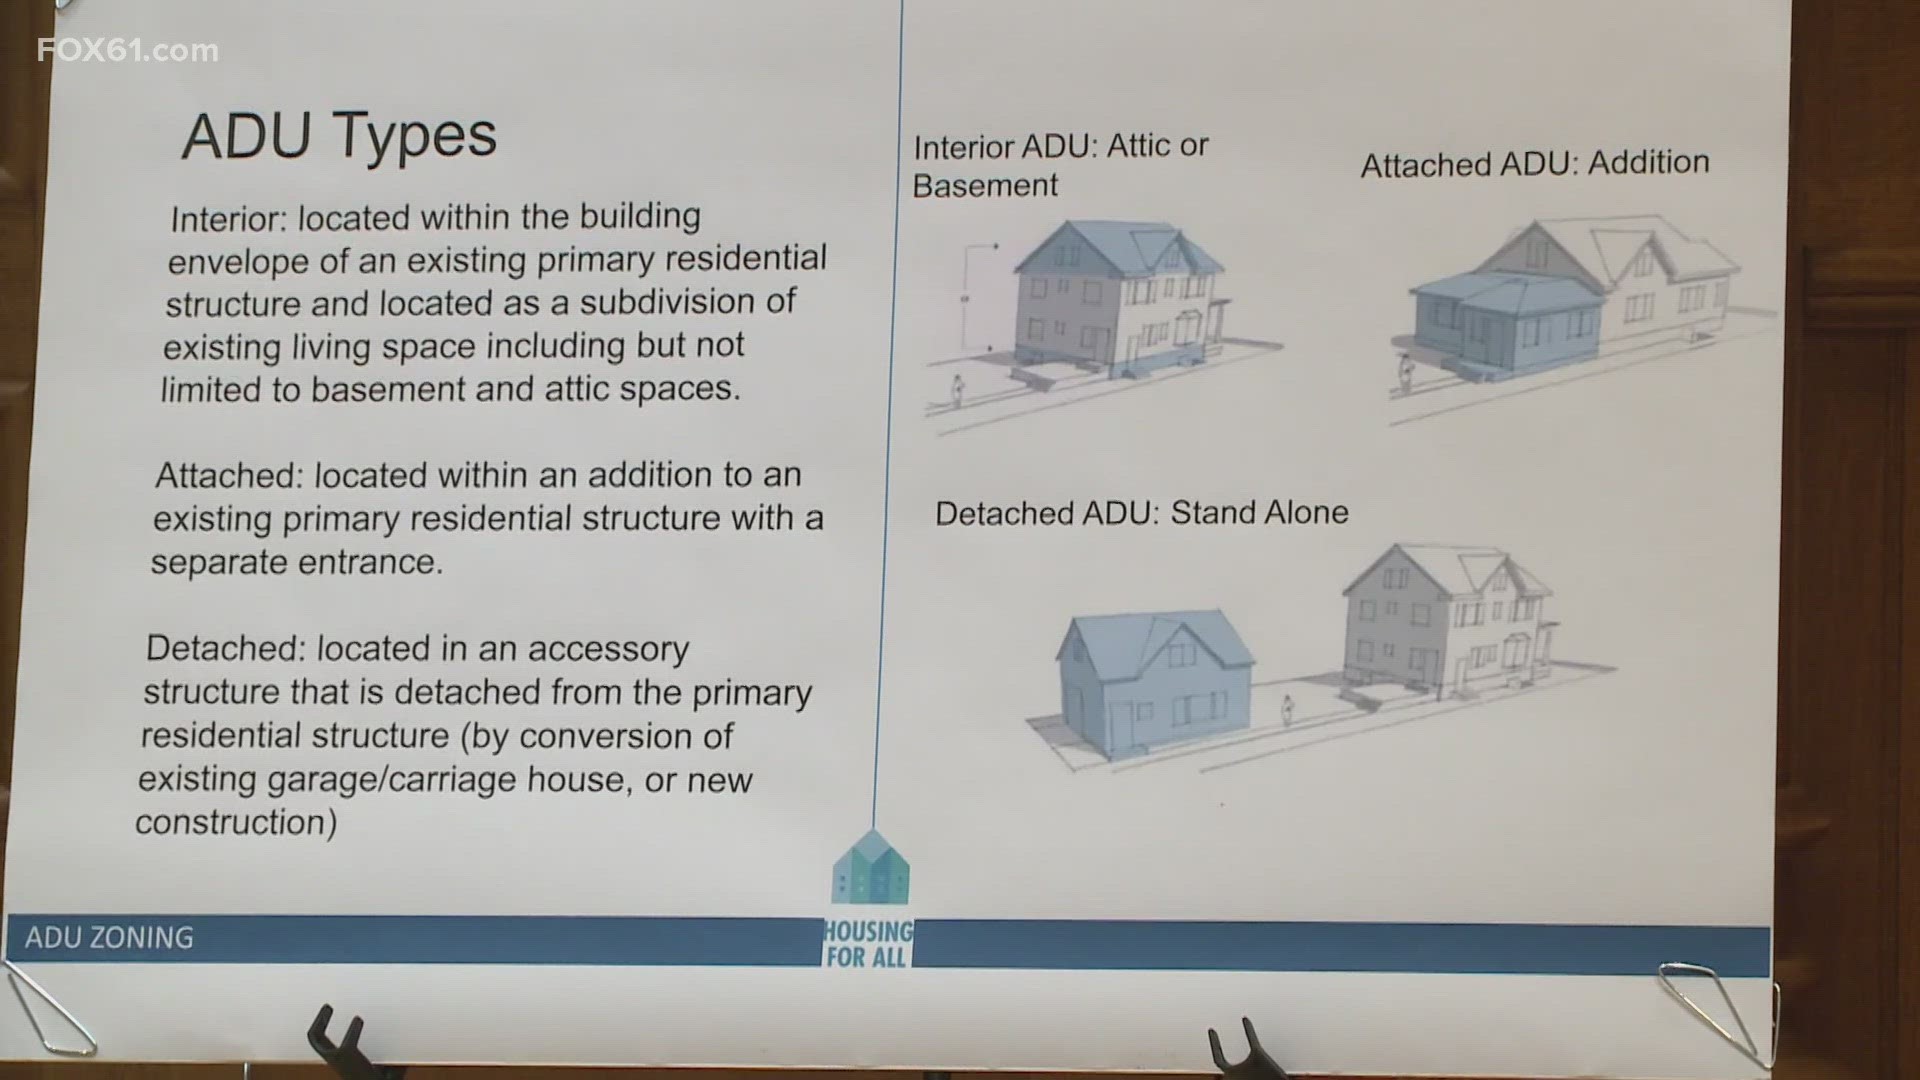 The proposal is an amendment to an already-existing ordinance for ADU’s (Accessory Dwelling Unit
s)